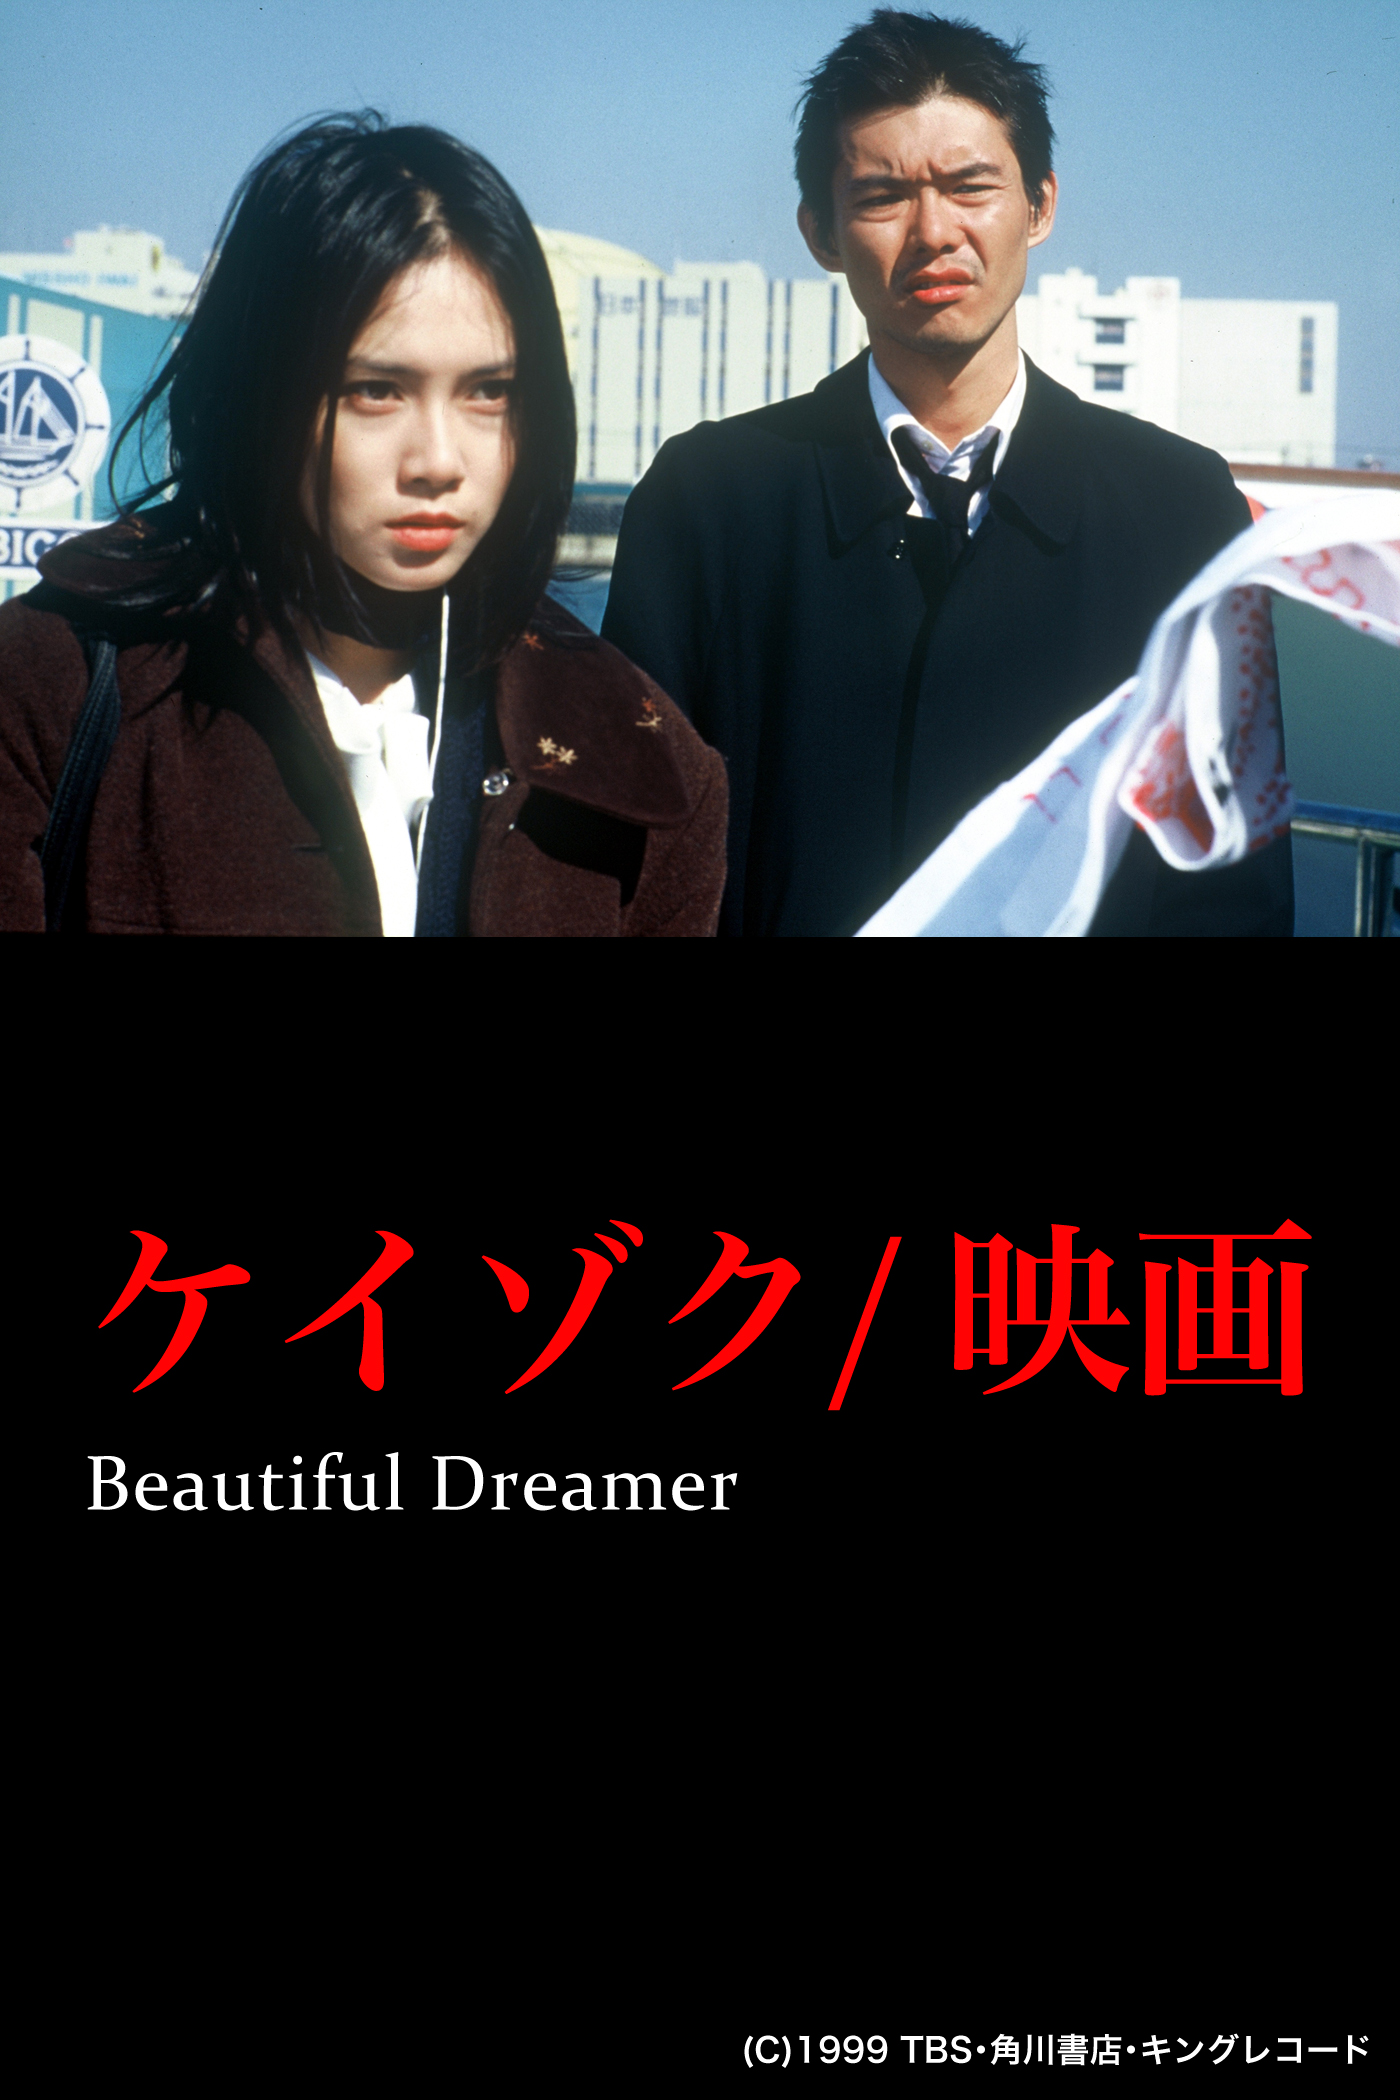 The Magnificent Dreamer [1977]